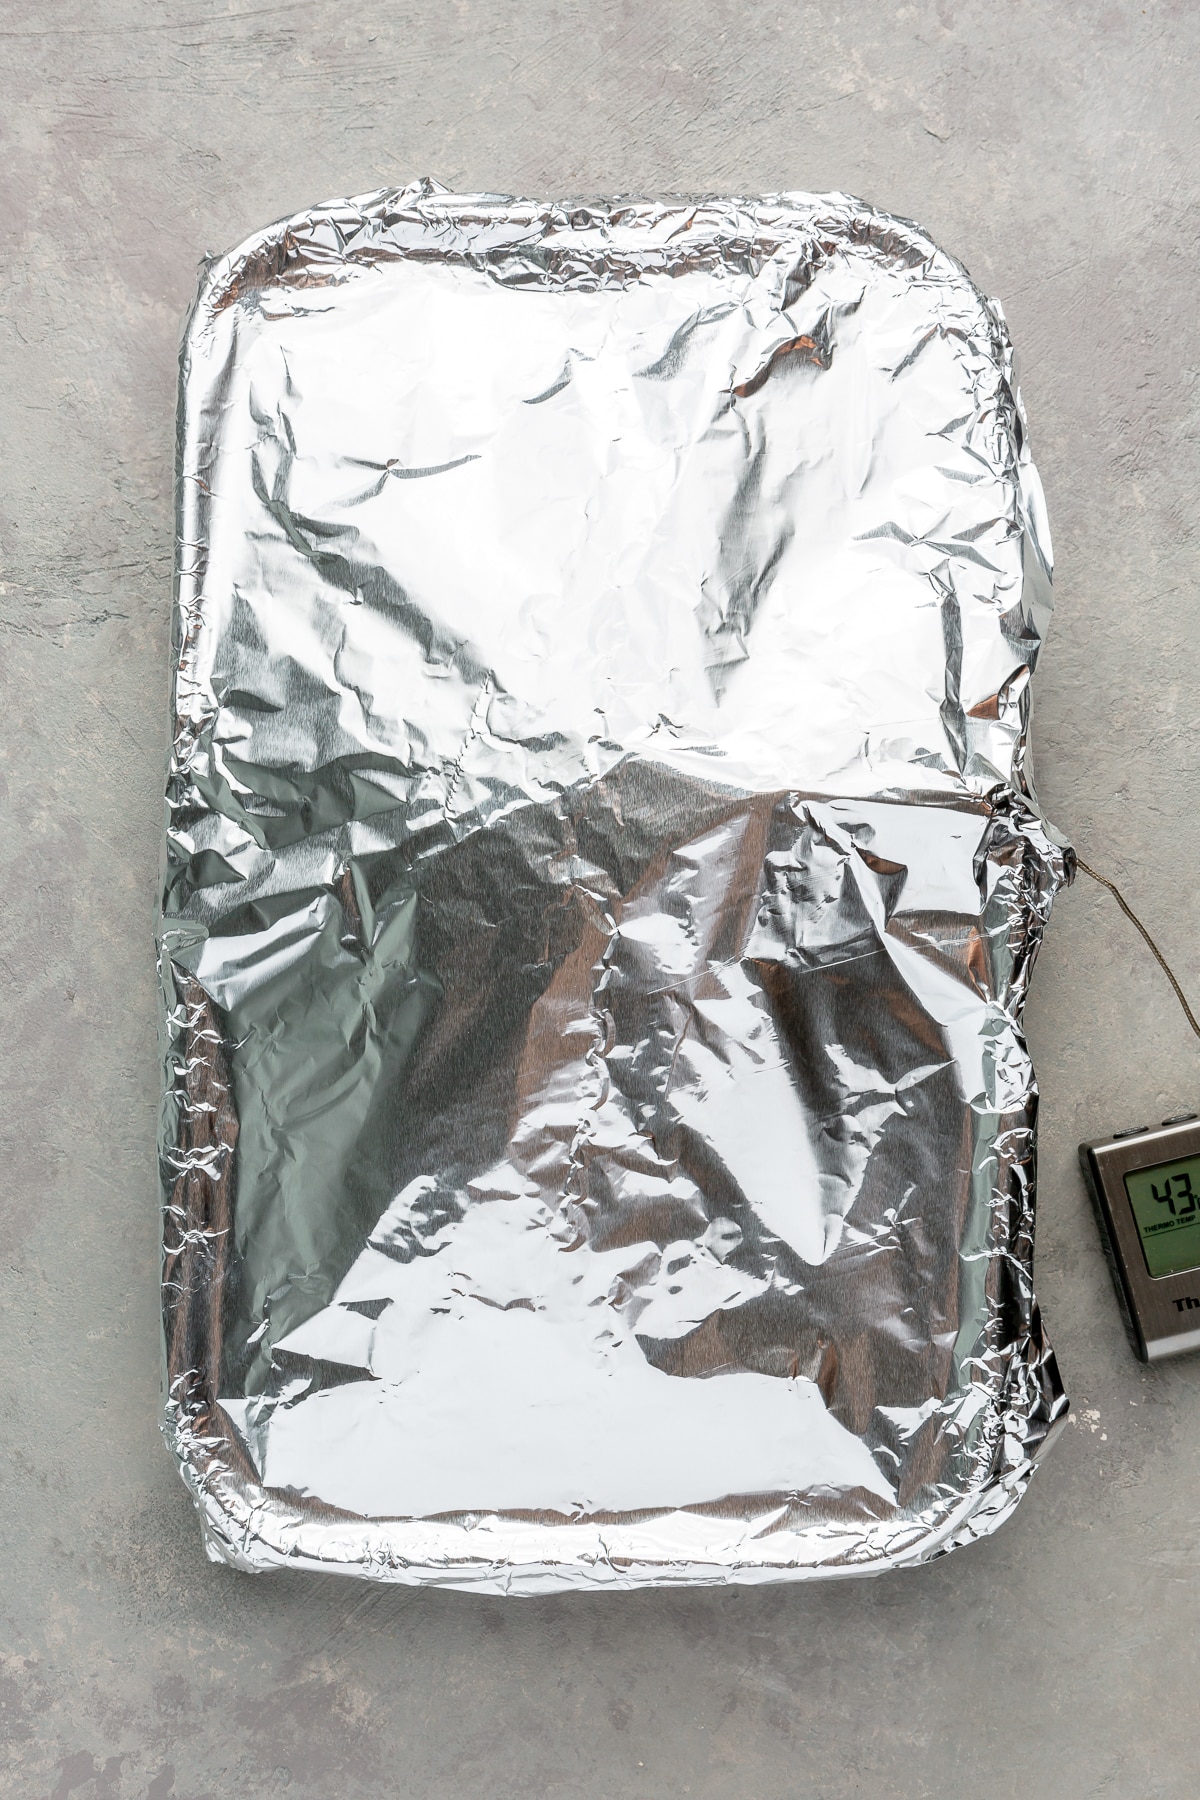 The turkey breast other ingredients in the baking pan have been covered with aluminum foil. The meat thermometer sticks out from the side.